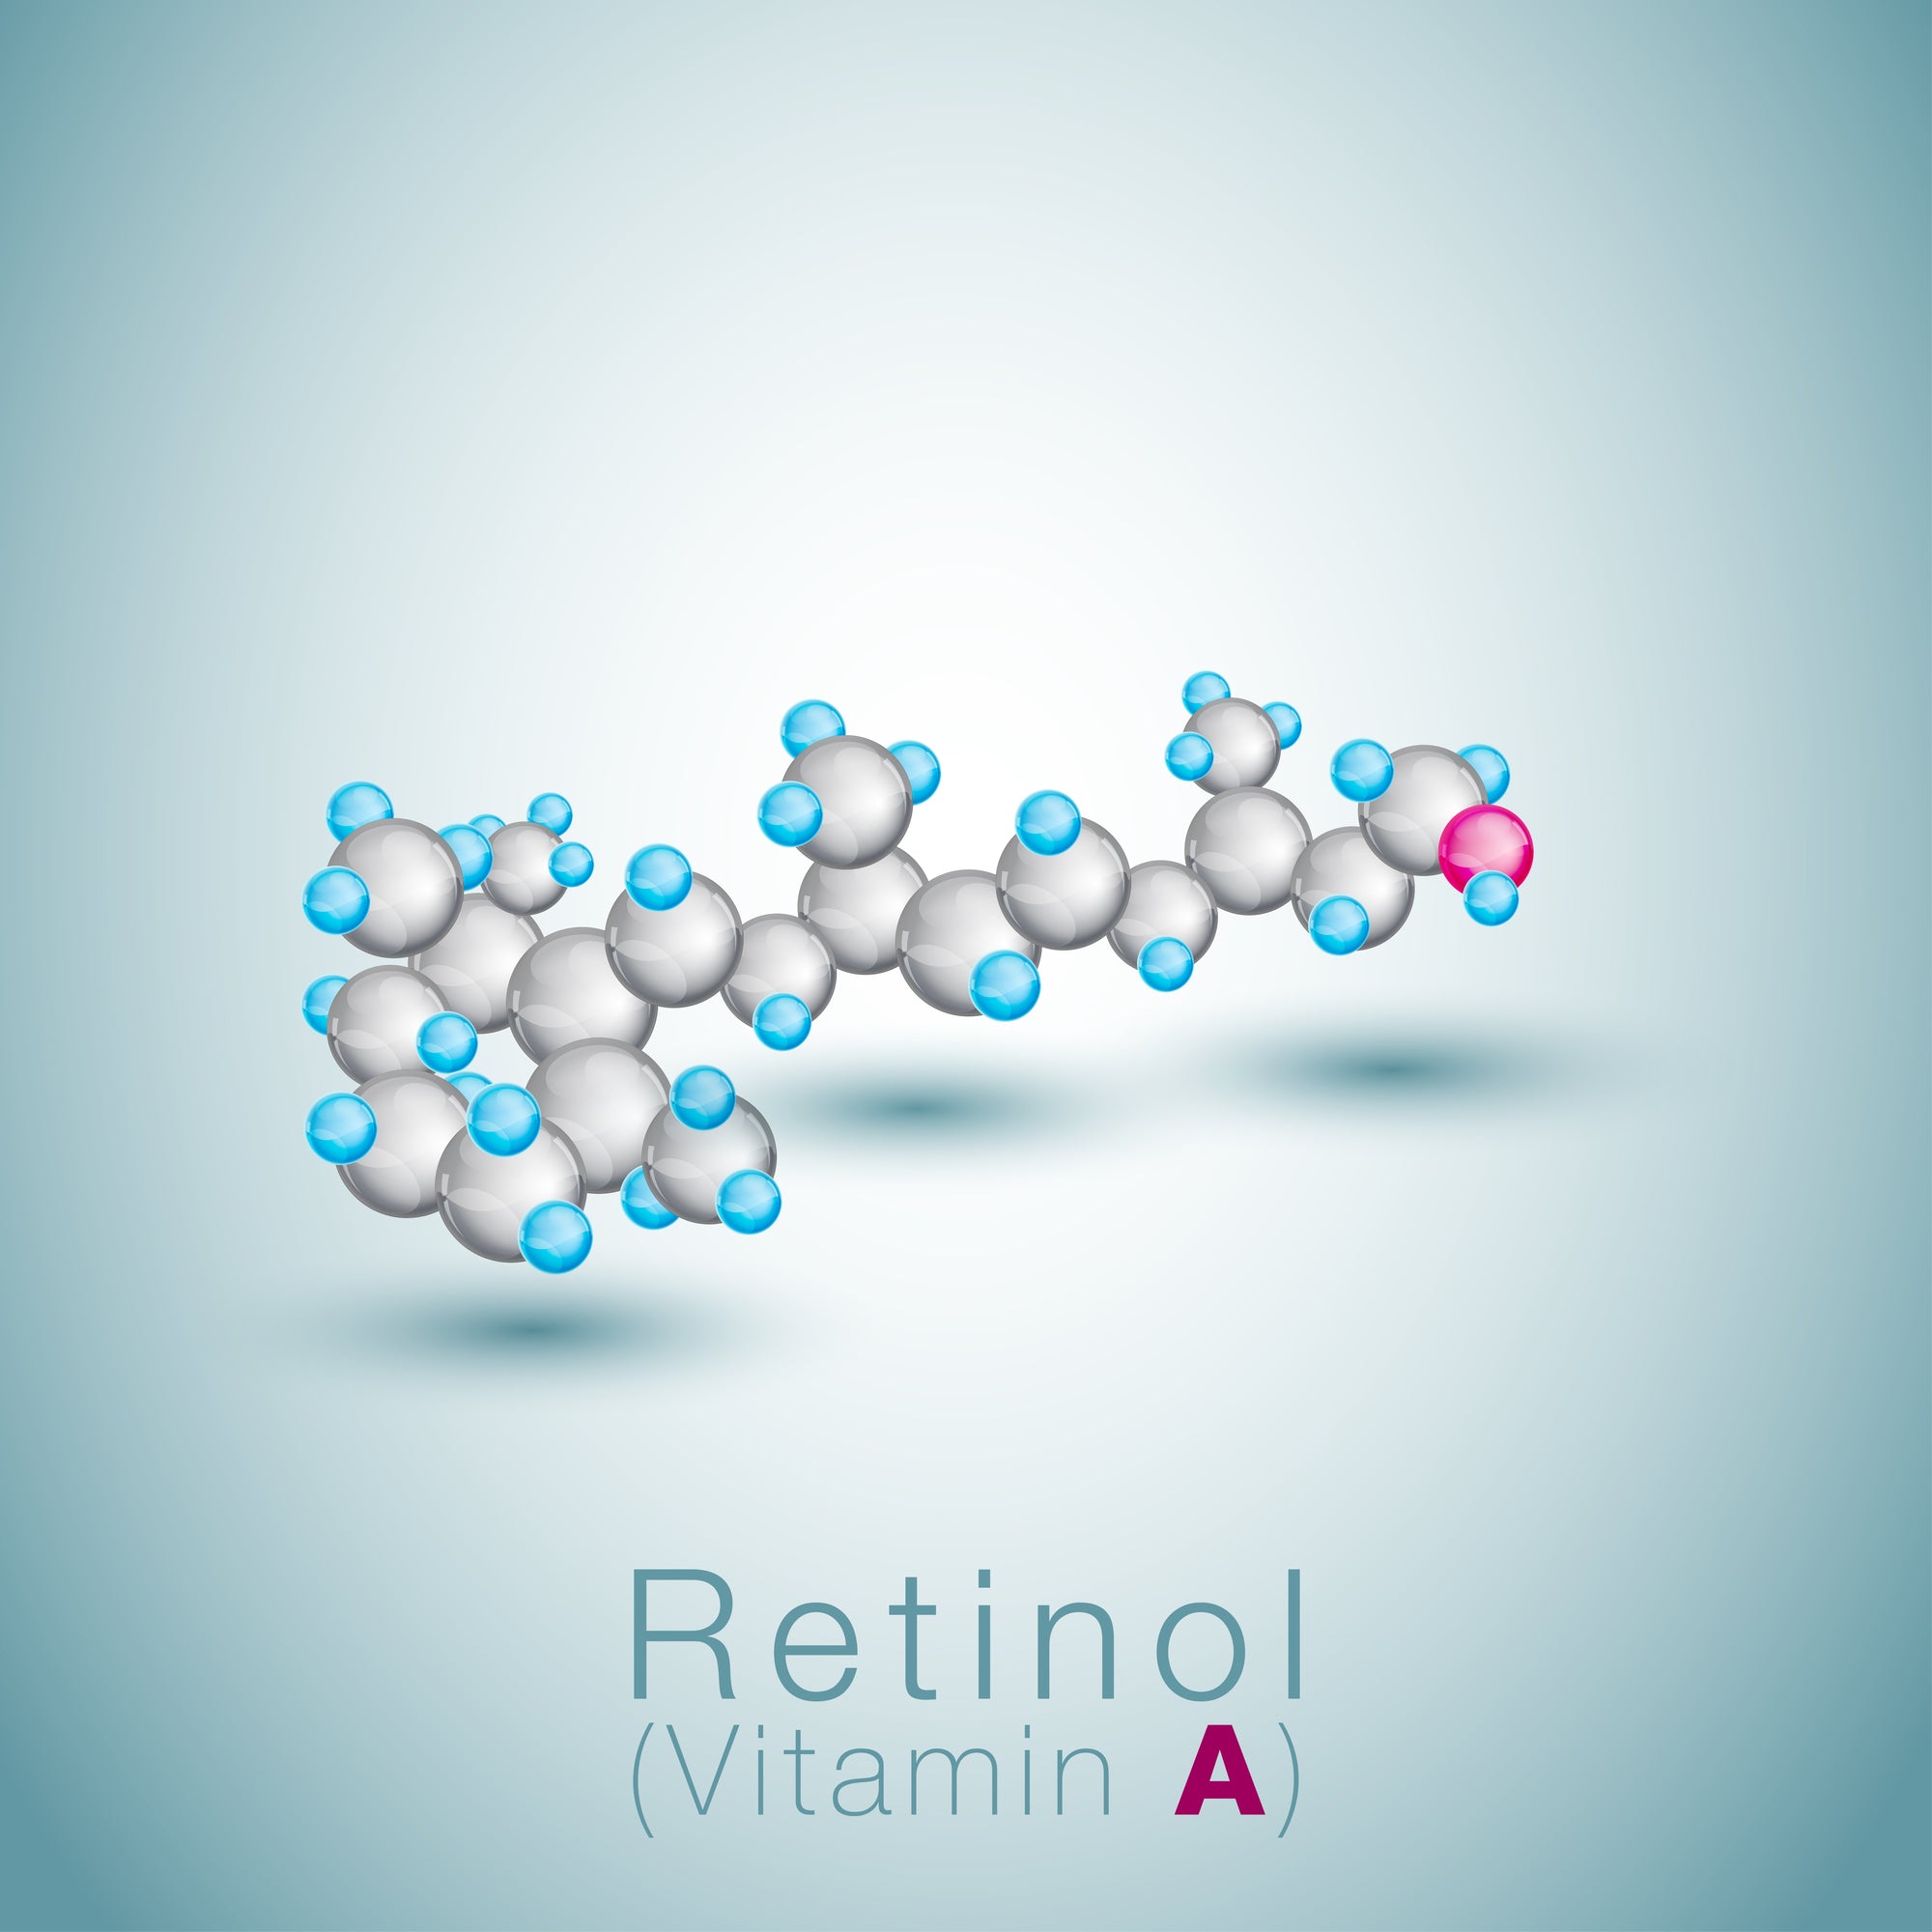 All You Need To Know About Retinol (And More!)